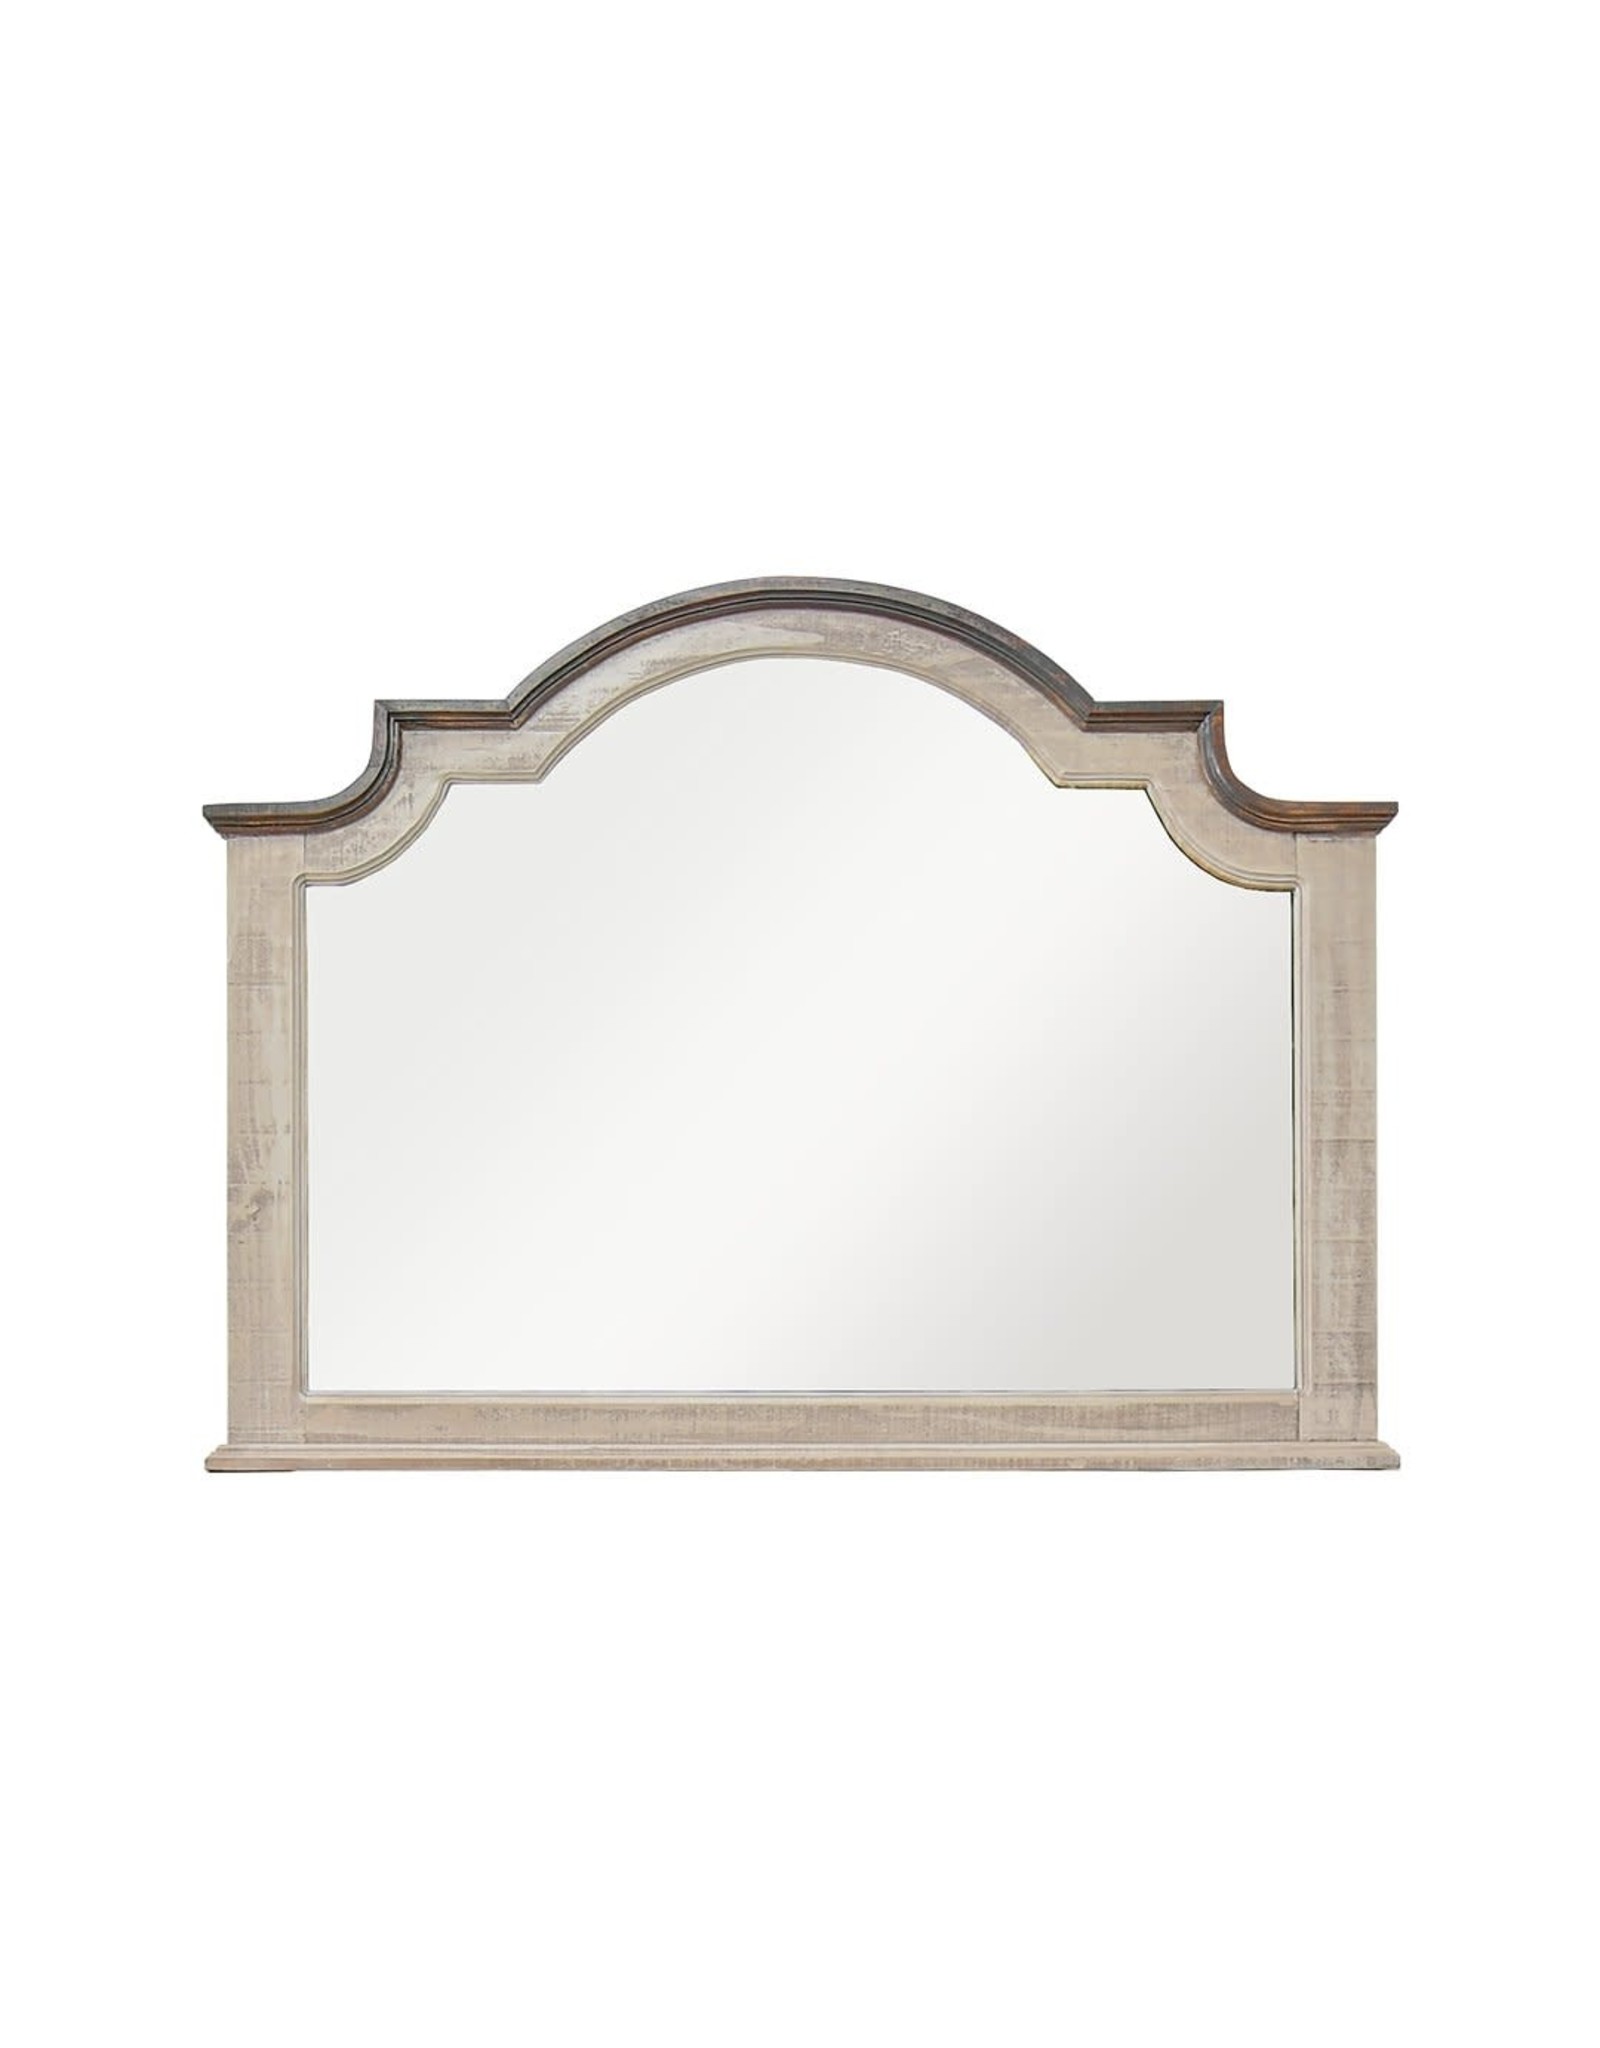 ACC 3271 PARK AVE MIRROR OLD GR/TO TOP